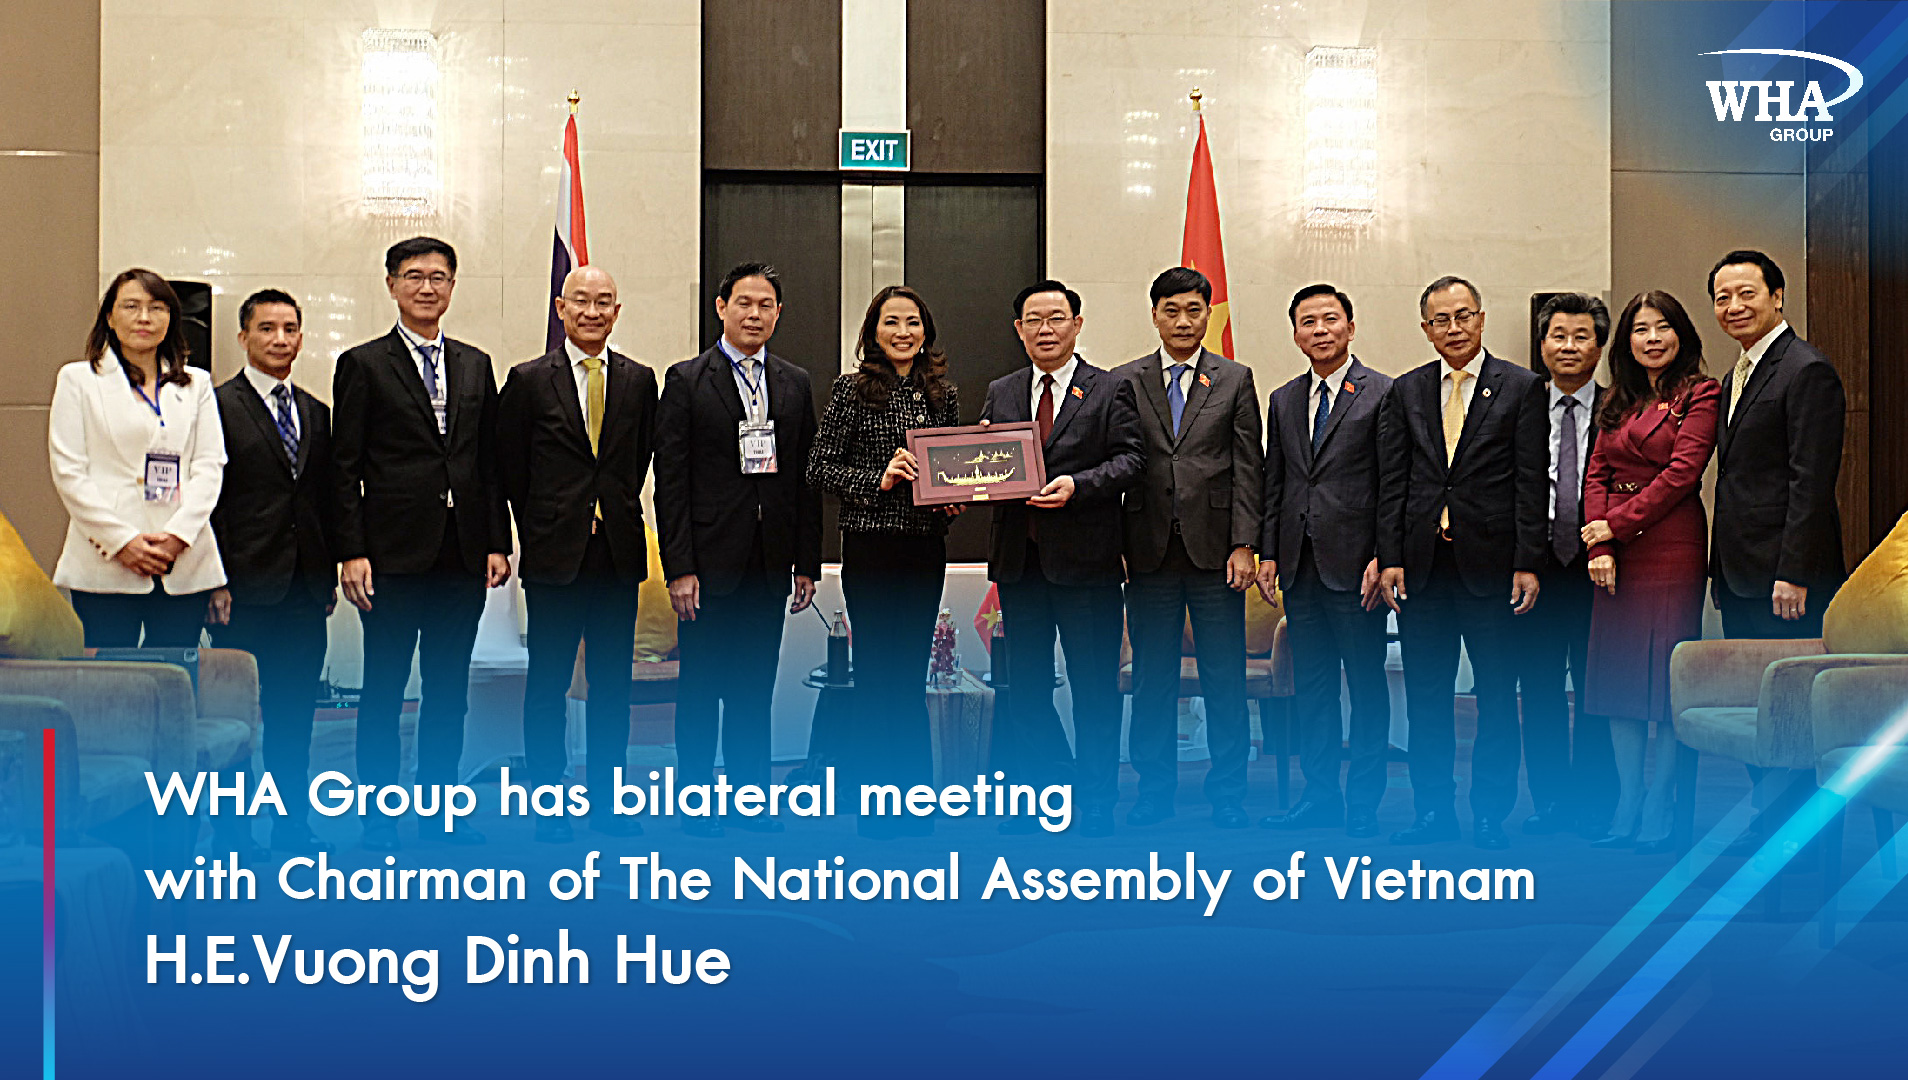 WHA Group has bilateral meeting with Chairman of The National Assembly of Vietnam H.E.Vuong Dinh Hue